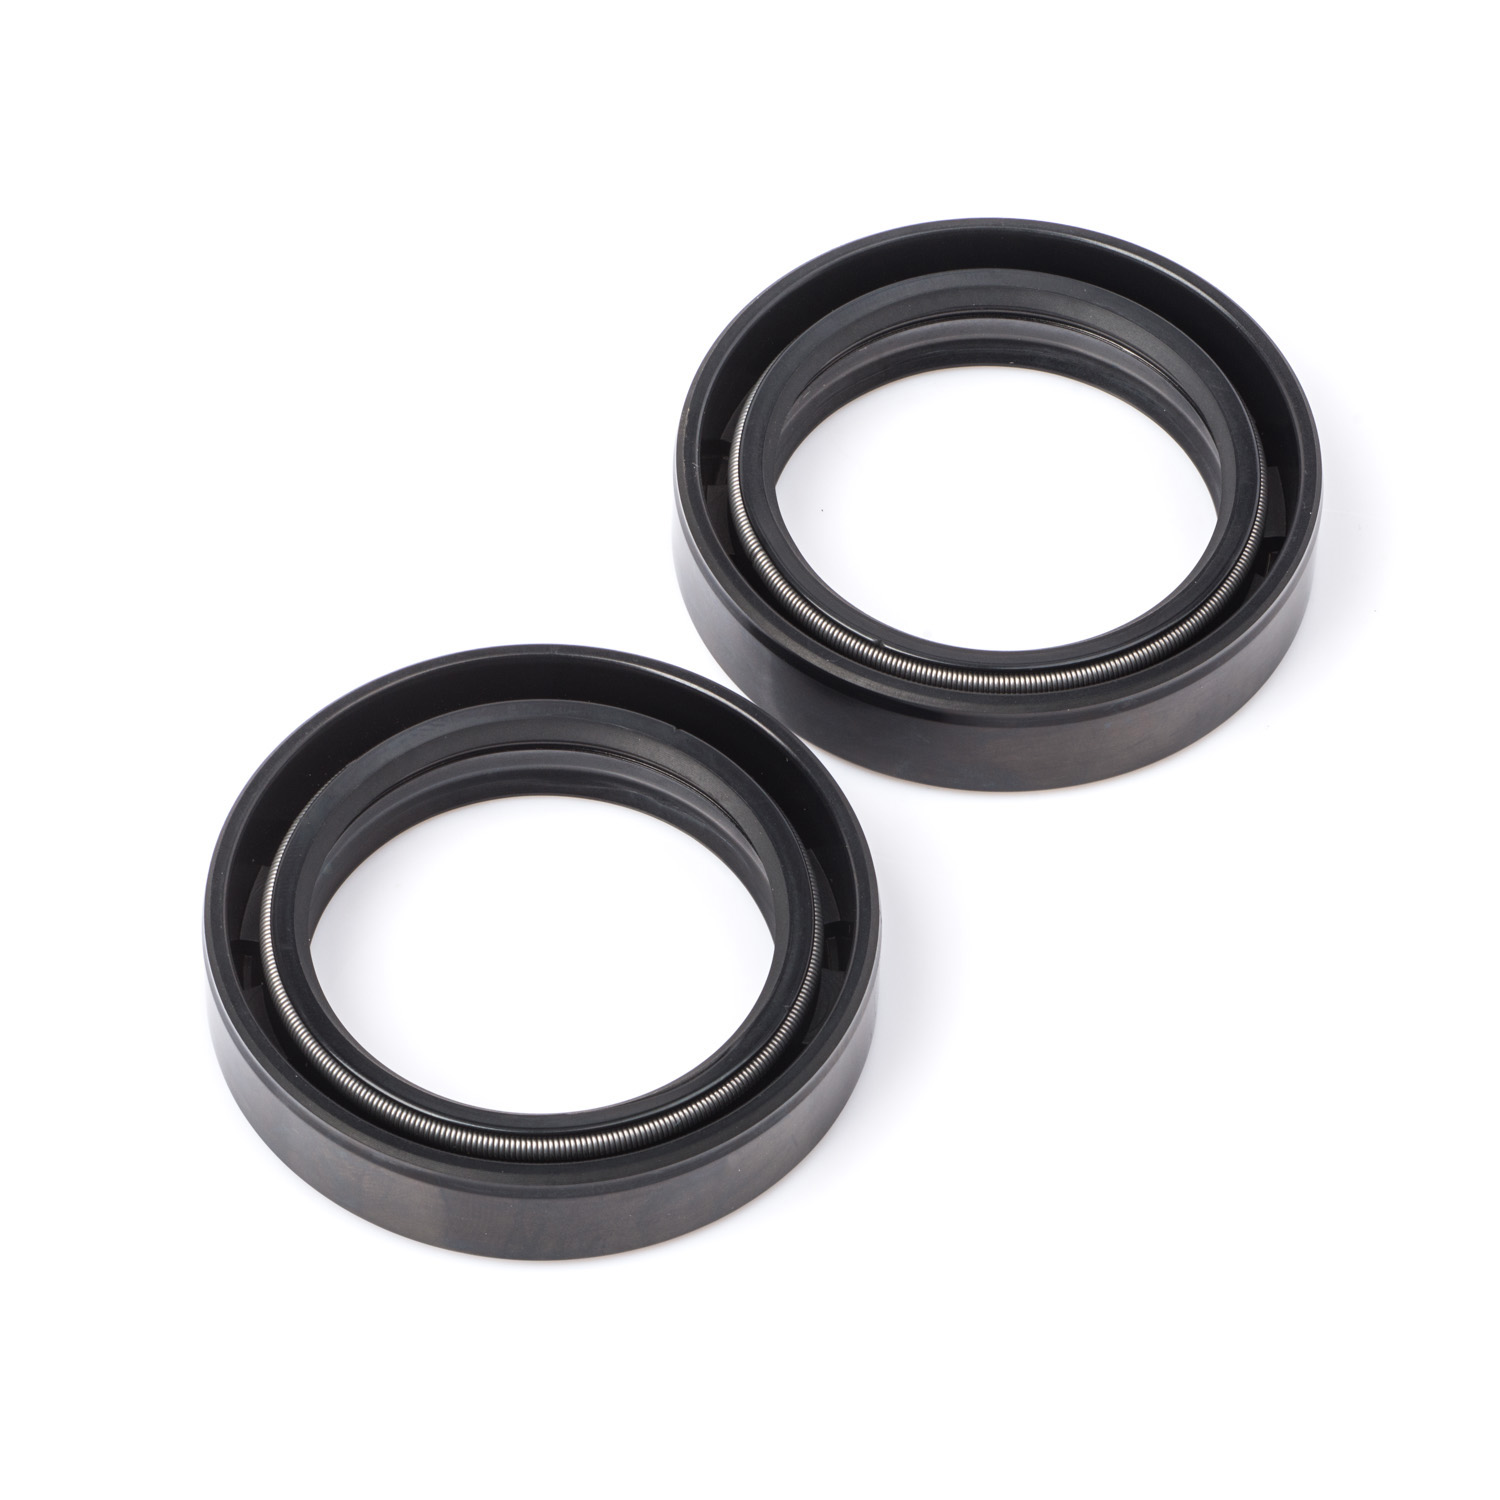 XS1100S Fork Oil Seals